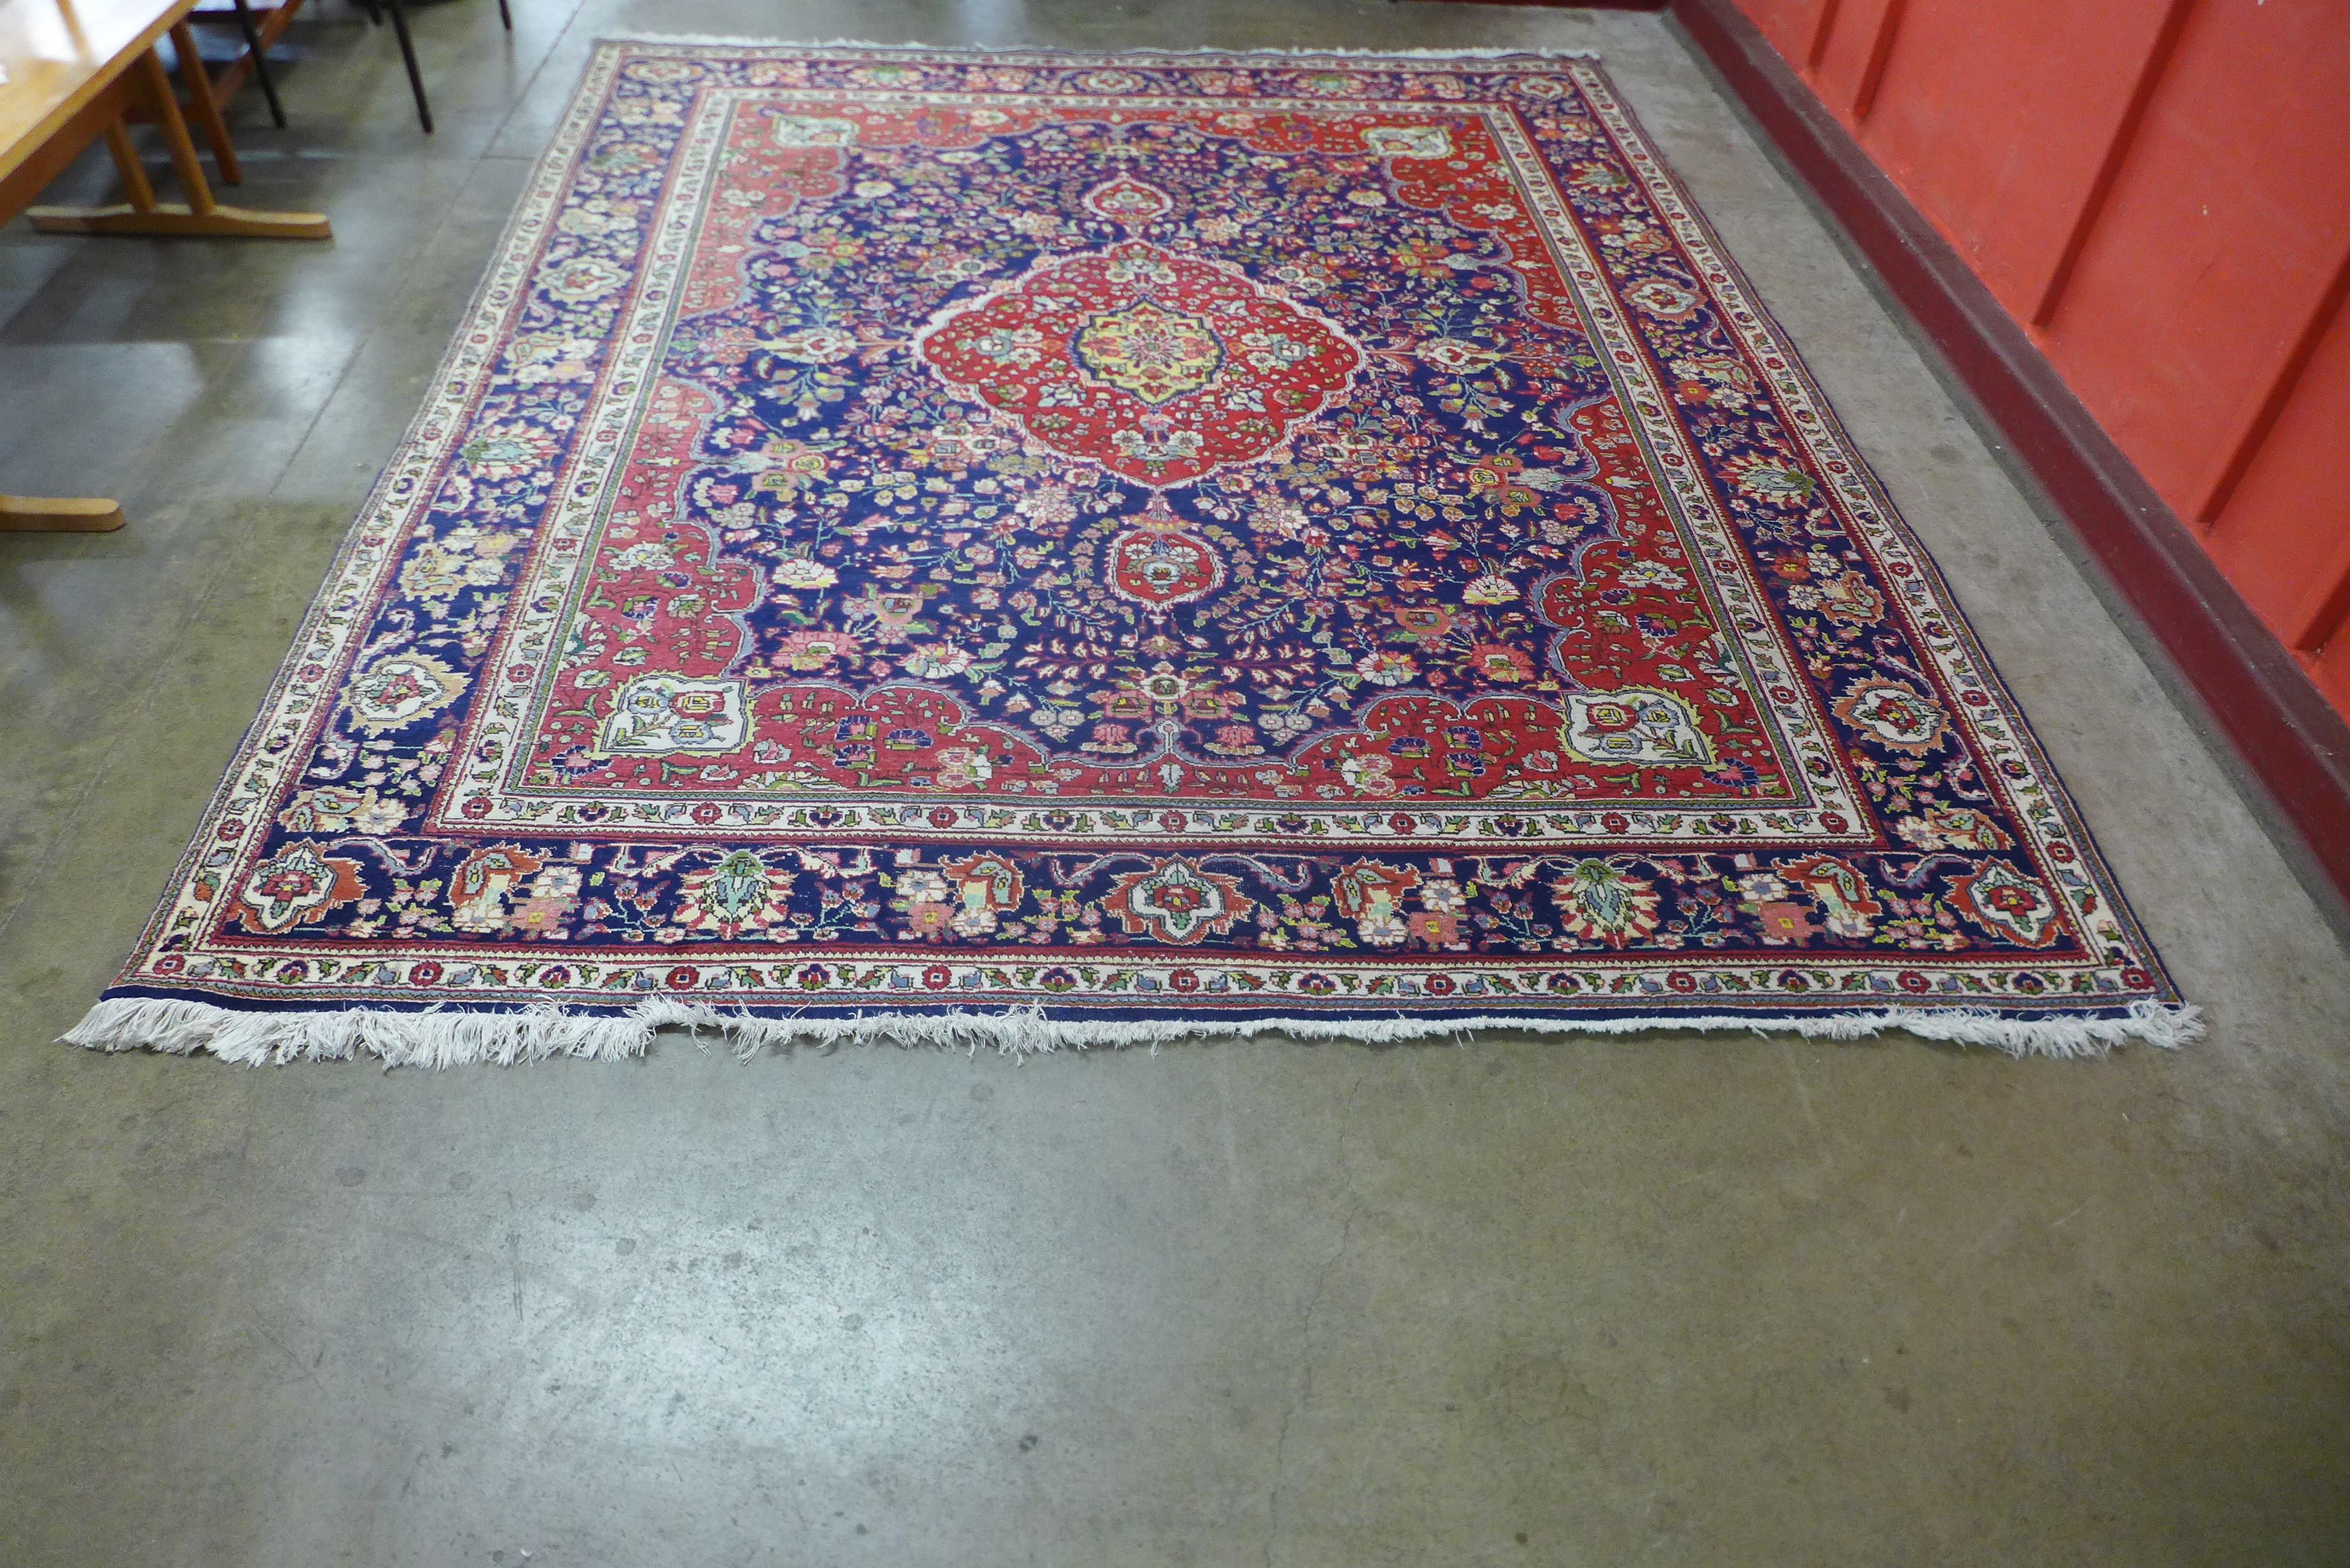 A large Persian red ground geometric patterned Tabriz rug, 355 x 304cms